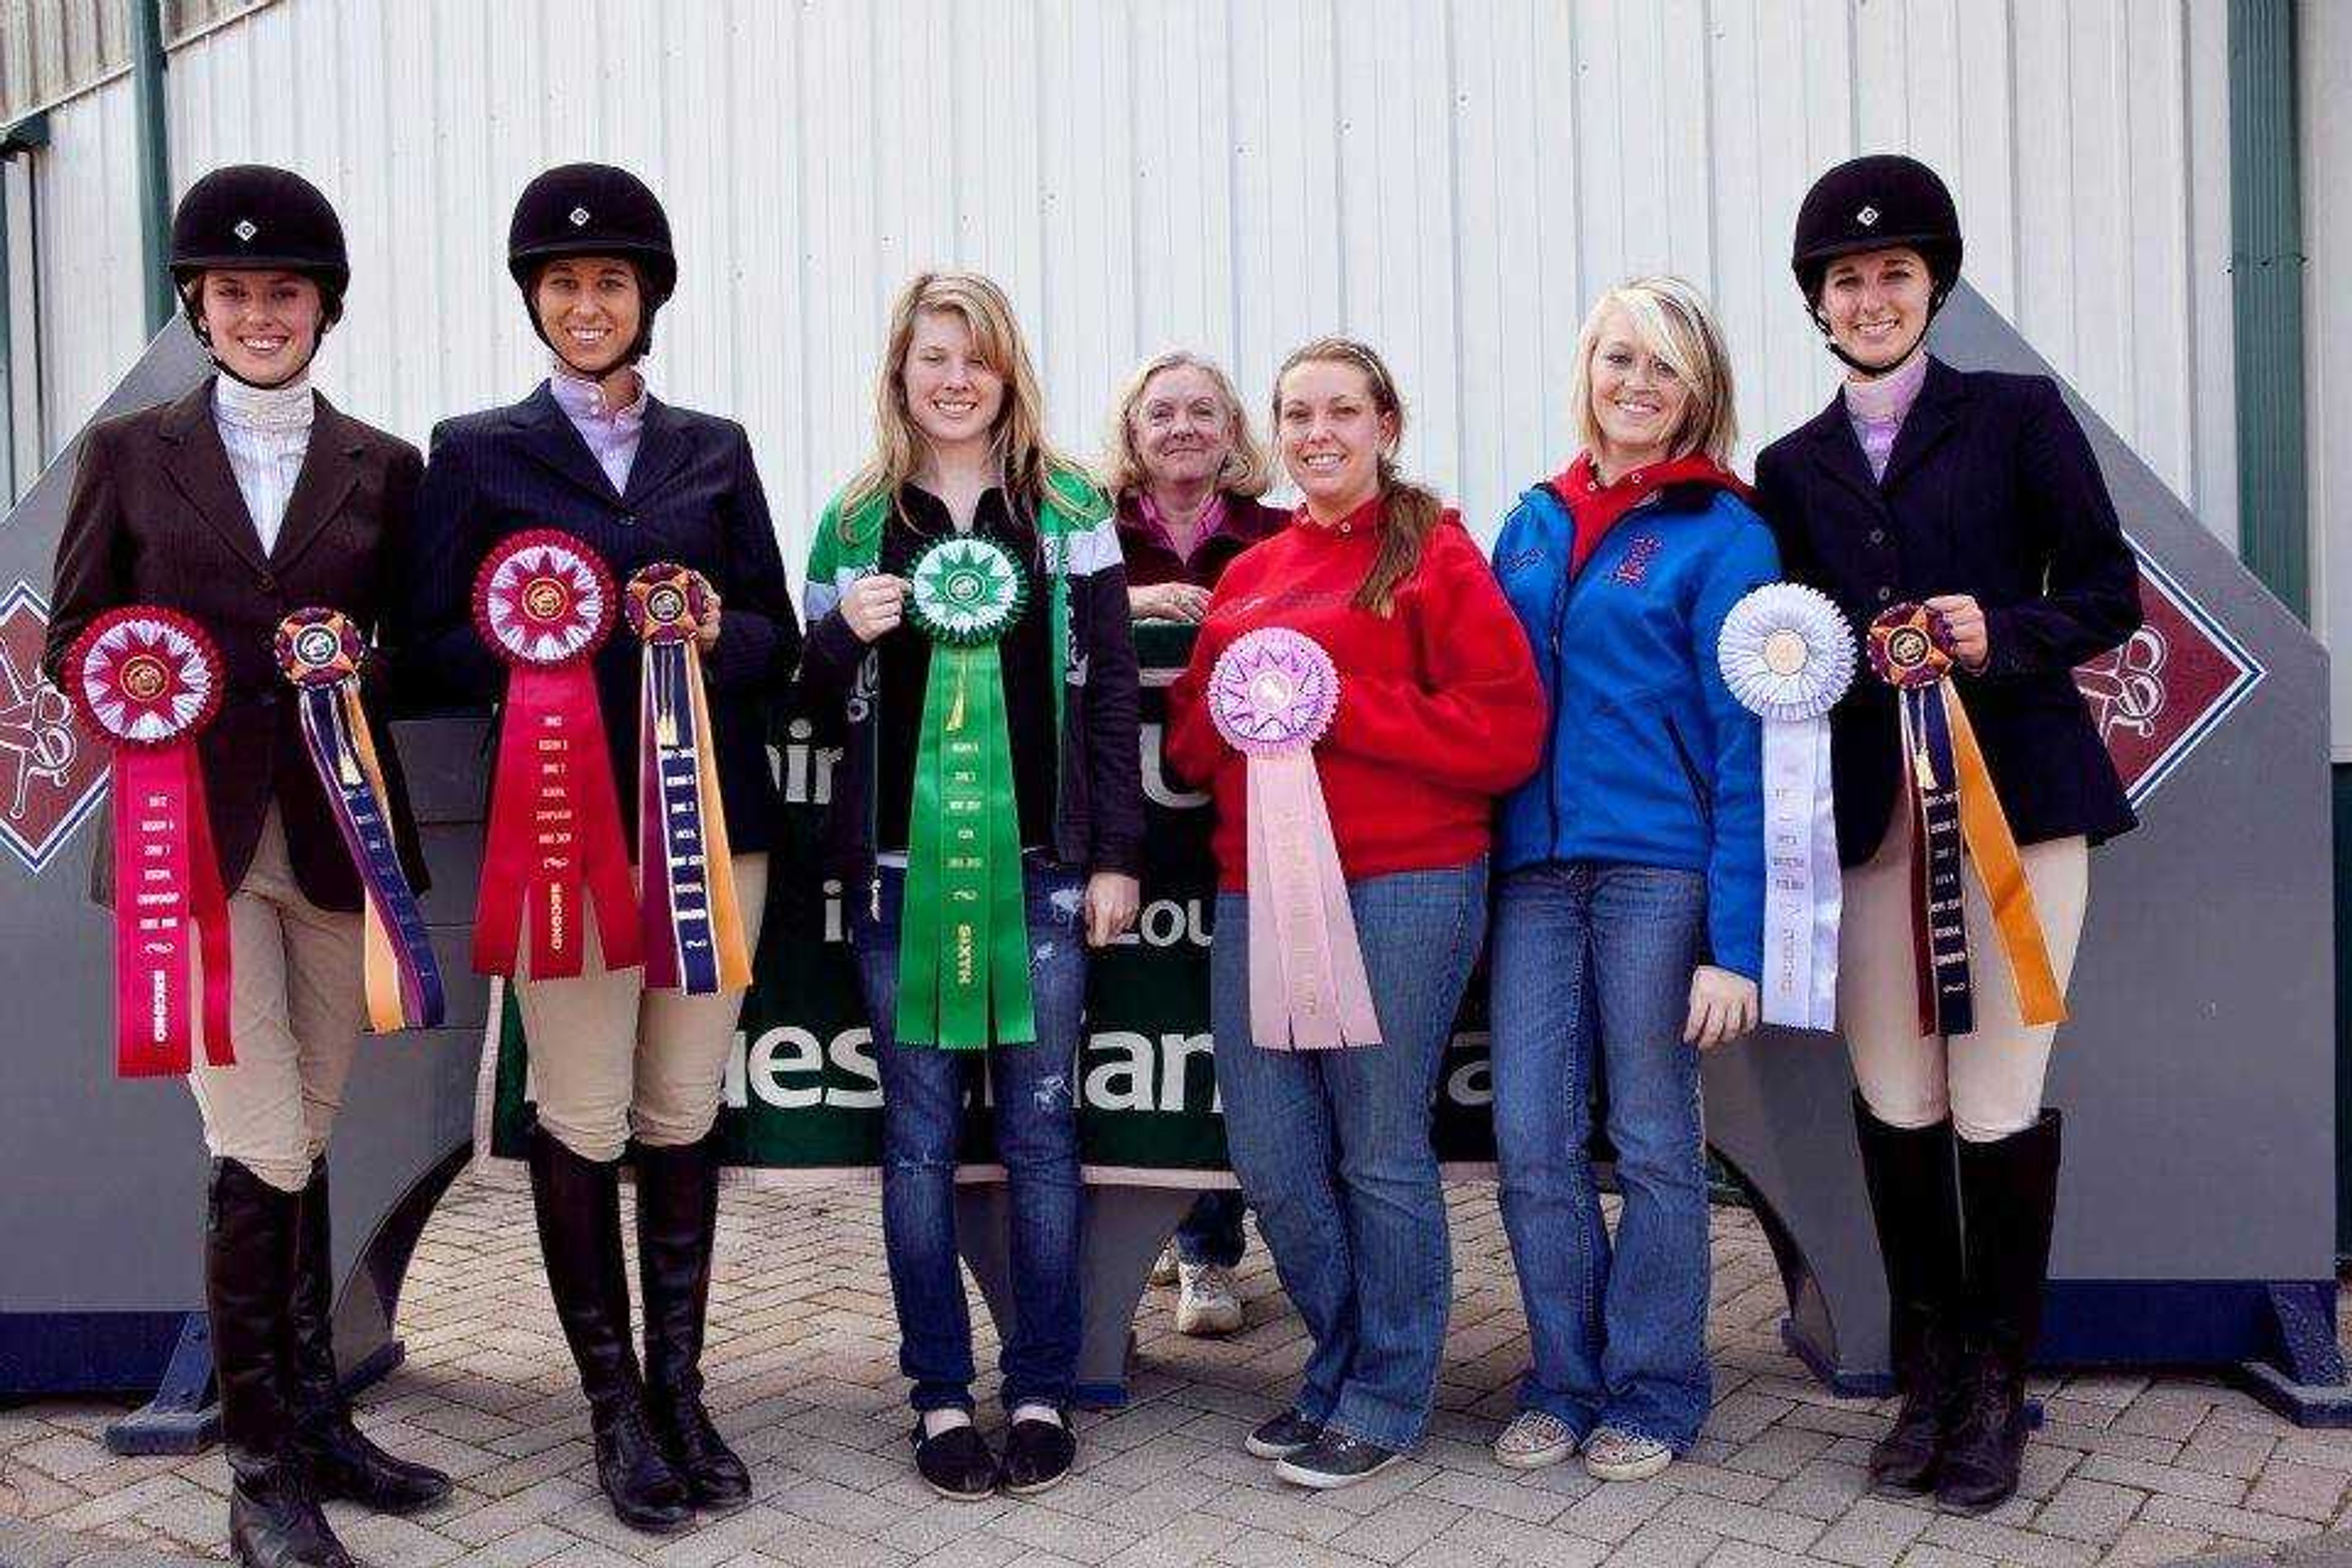 Equestrian team finishes off the season strong